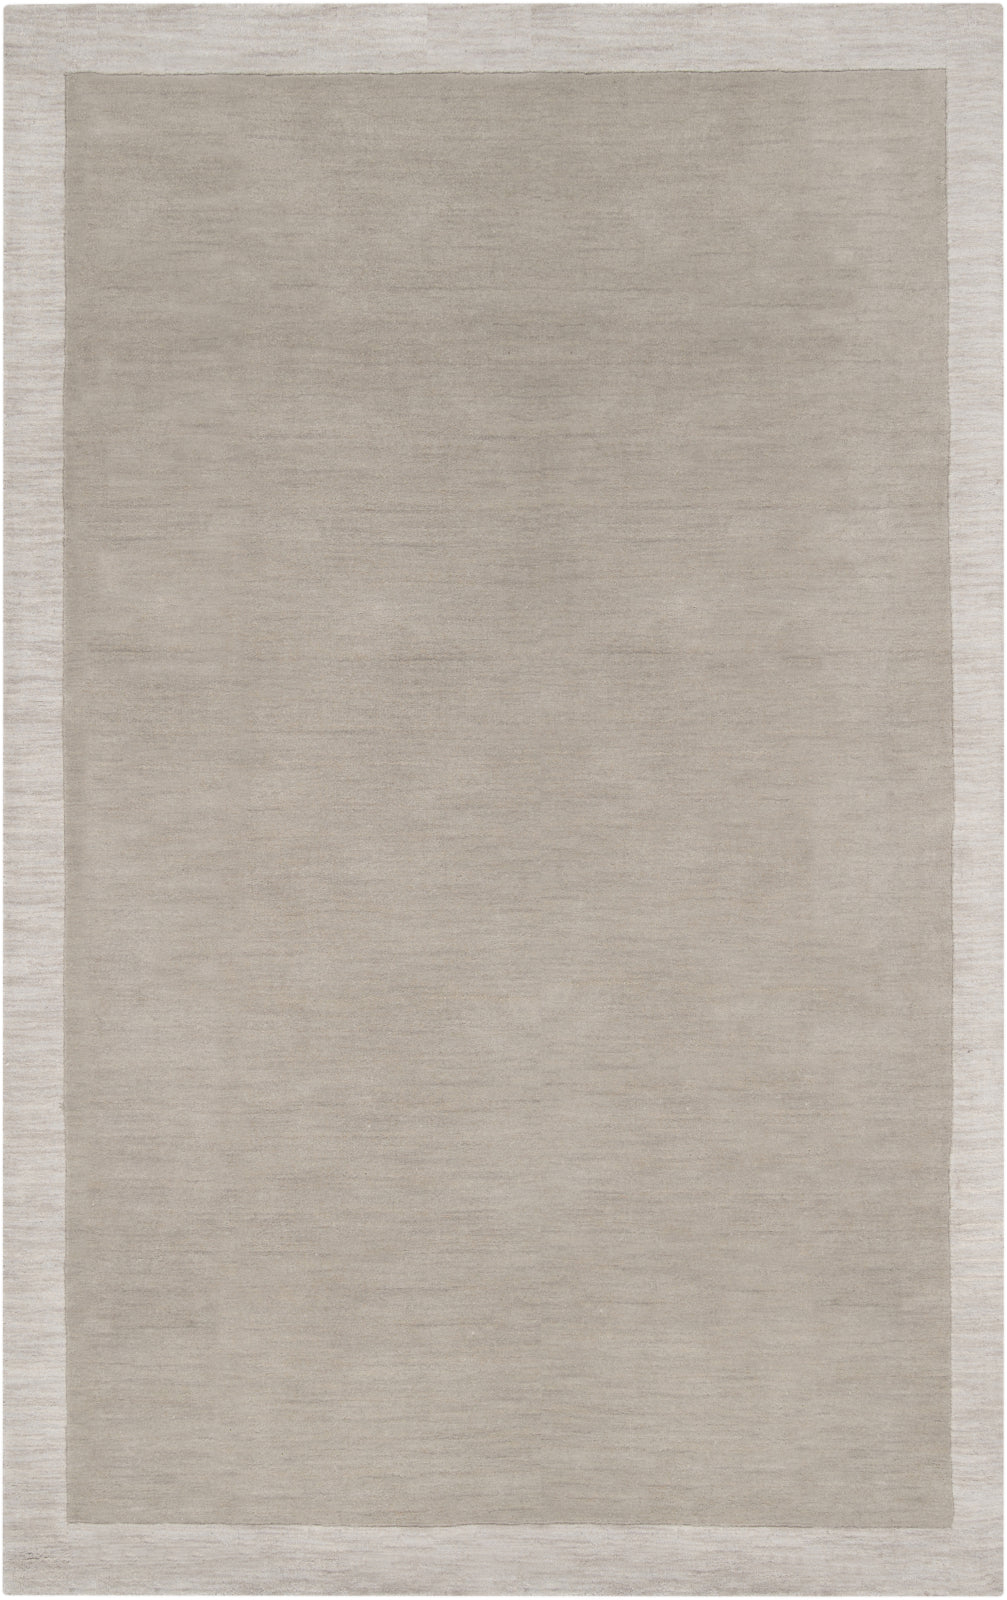 Surya Madison Square MDS-1001 Area Rug by angelo:HOME